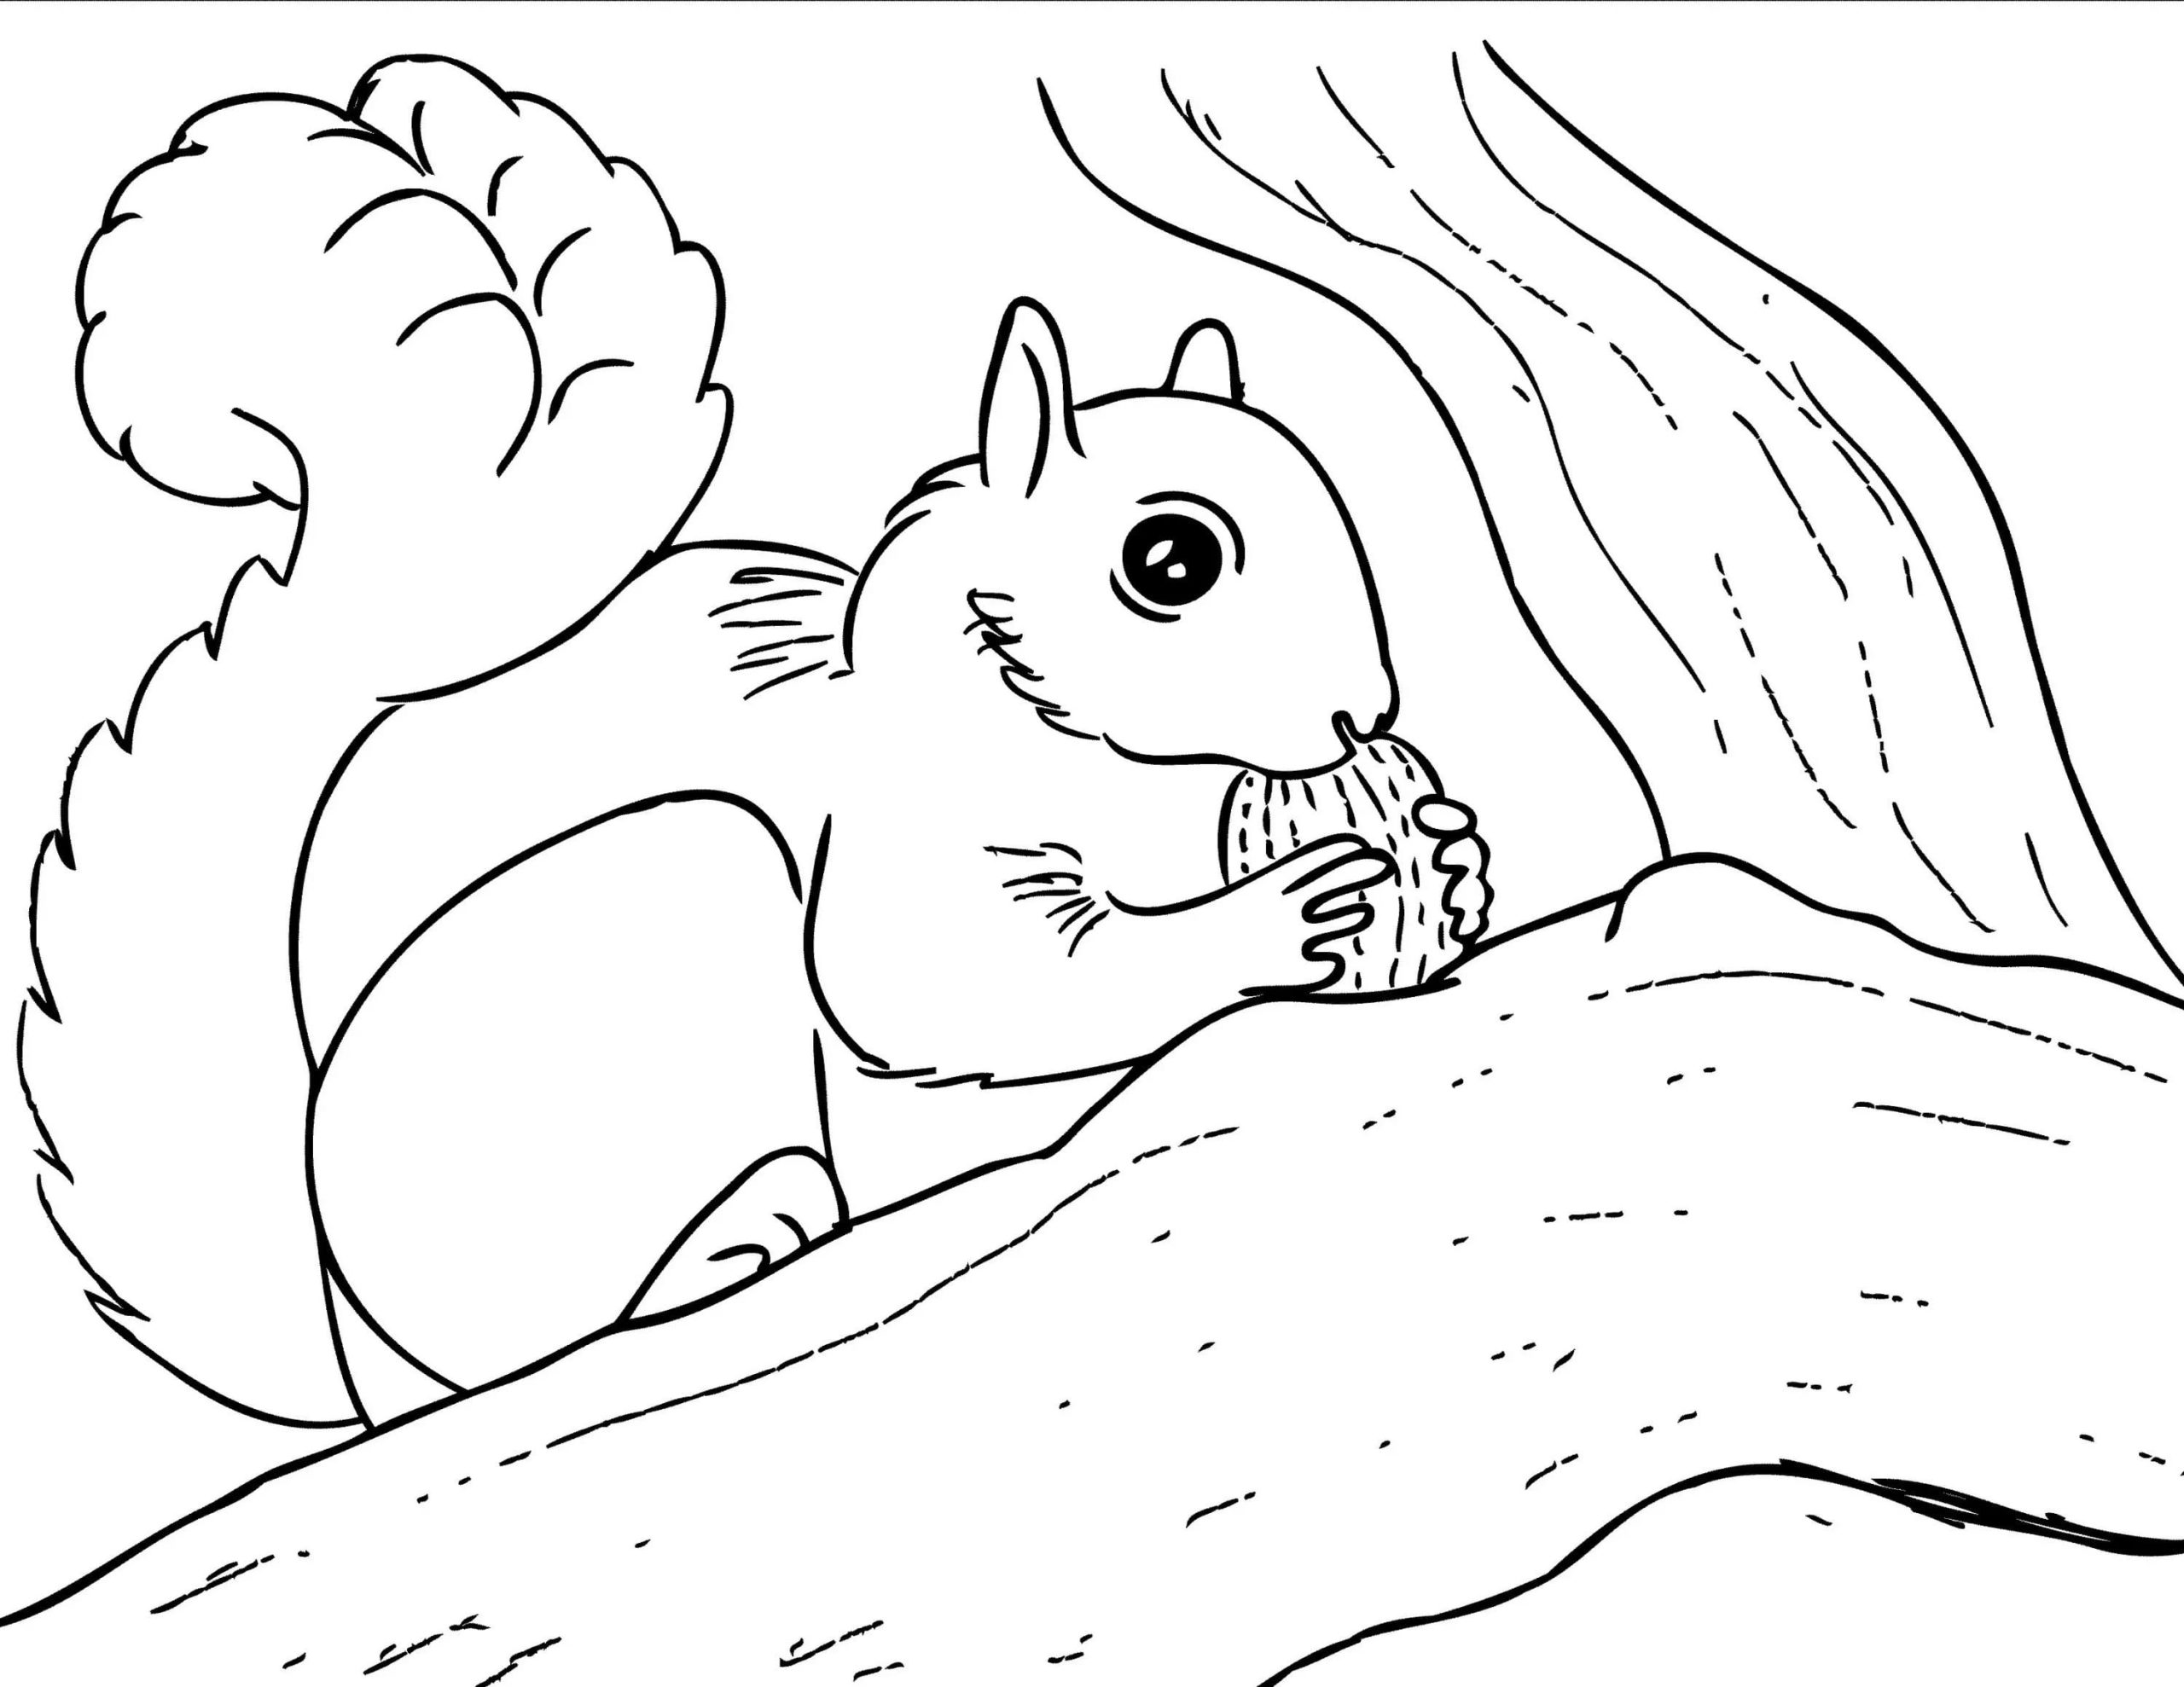 Exquisite squirrel coloring book for 2-3 year olds